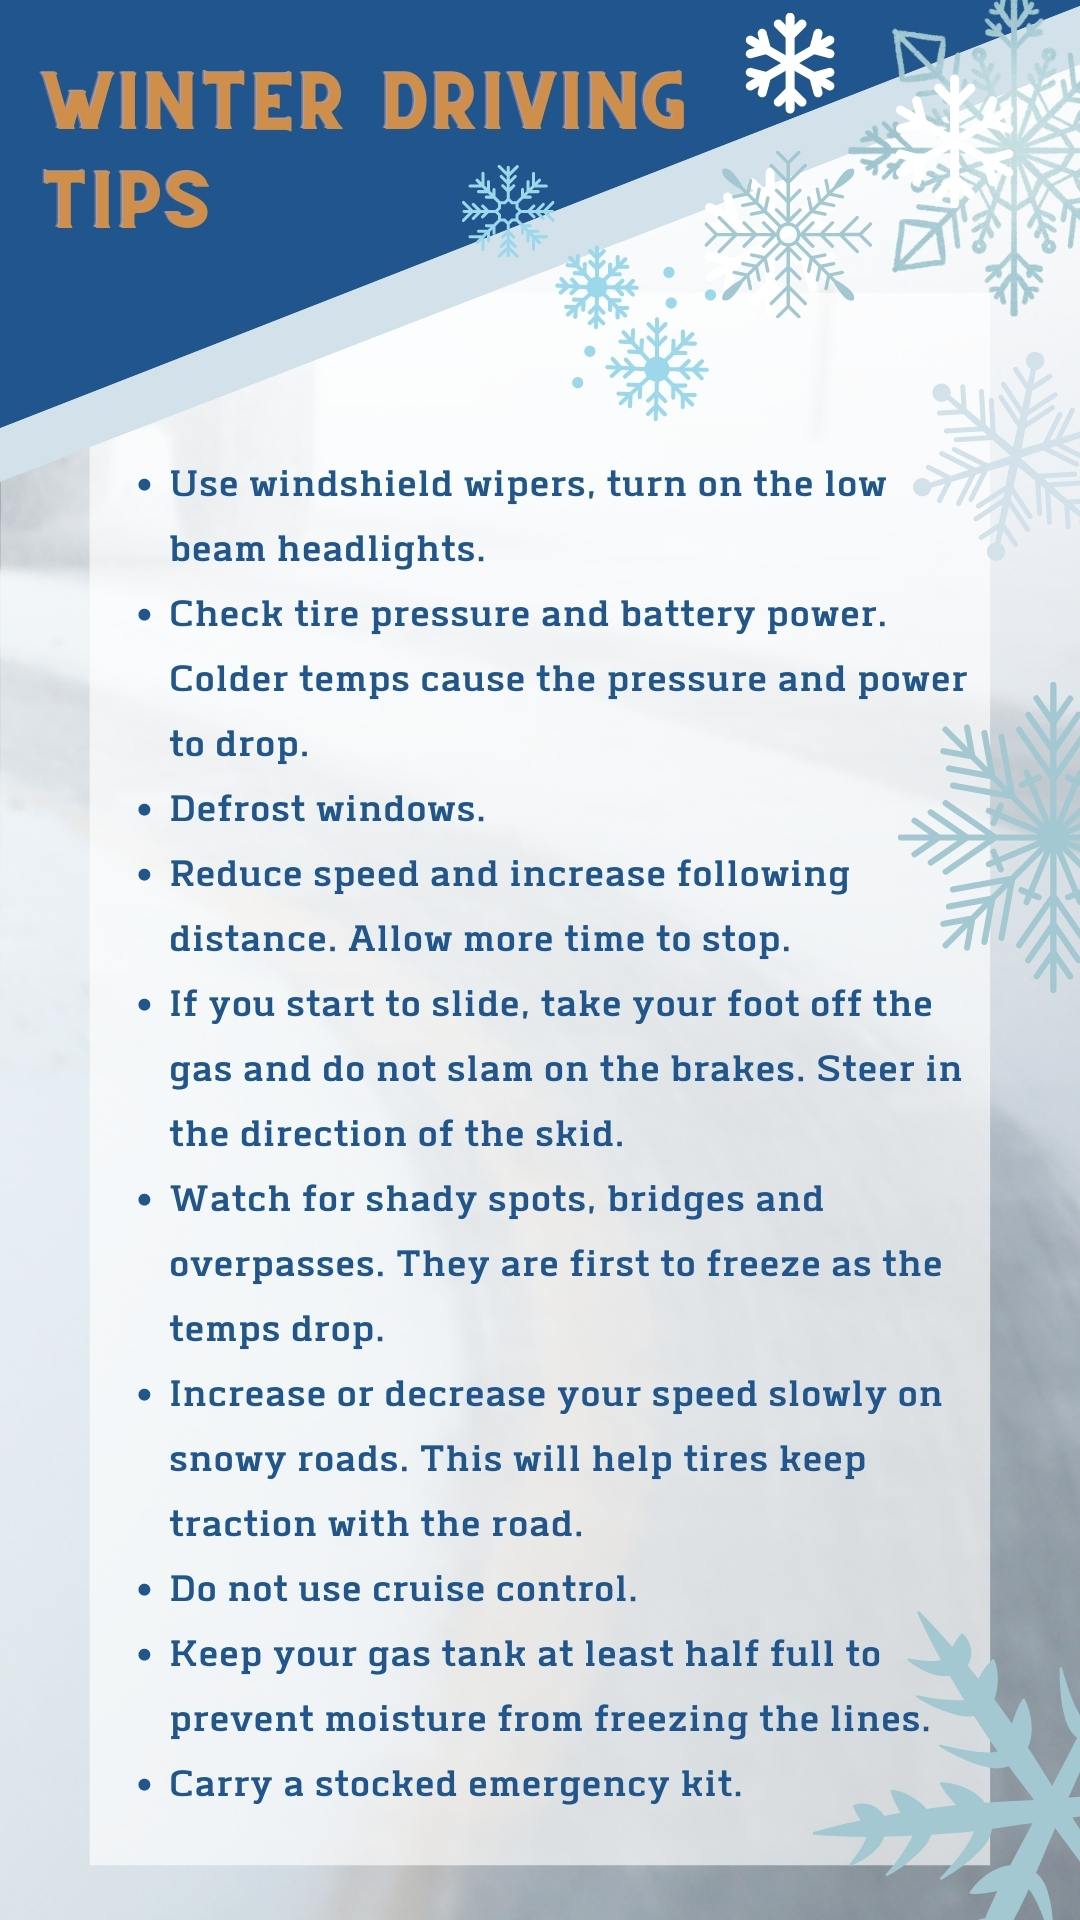 Tips for Safer Winter Driving Use windshield wipers and turn on the low beam headlights. Check your tire pressure and battery power because the colder temperatures cause the pressure and power to drop. Defrost windows. Reduce speed and increase following distance to allow more time to stop. If you start to slide, take your foot off the gas and do not slam on the brakes. Steer in the direction of the skid. Watch for shady spots, bridges and overpasses because they will be the first to freeze as the temperatures drop. When starting or stopping on snowy or icy roads, increase or decrease your speed slowly. This will help tires keep traction with the road.  Do not use cruise control. Keep your gas tank at least half full at all times to prevent moisture from freezing the lines. Carry a stocked emergency kit. 